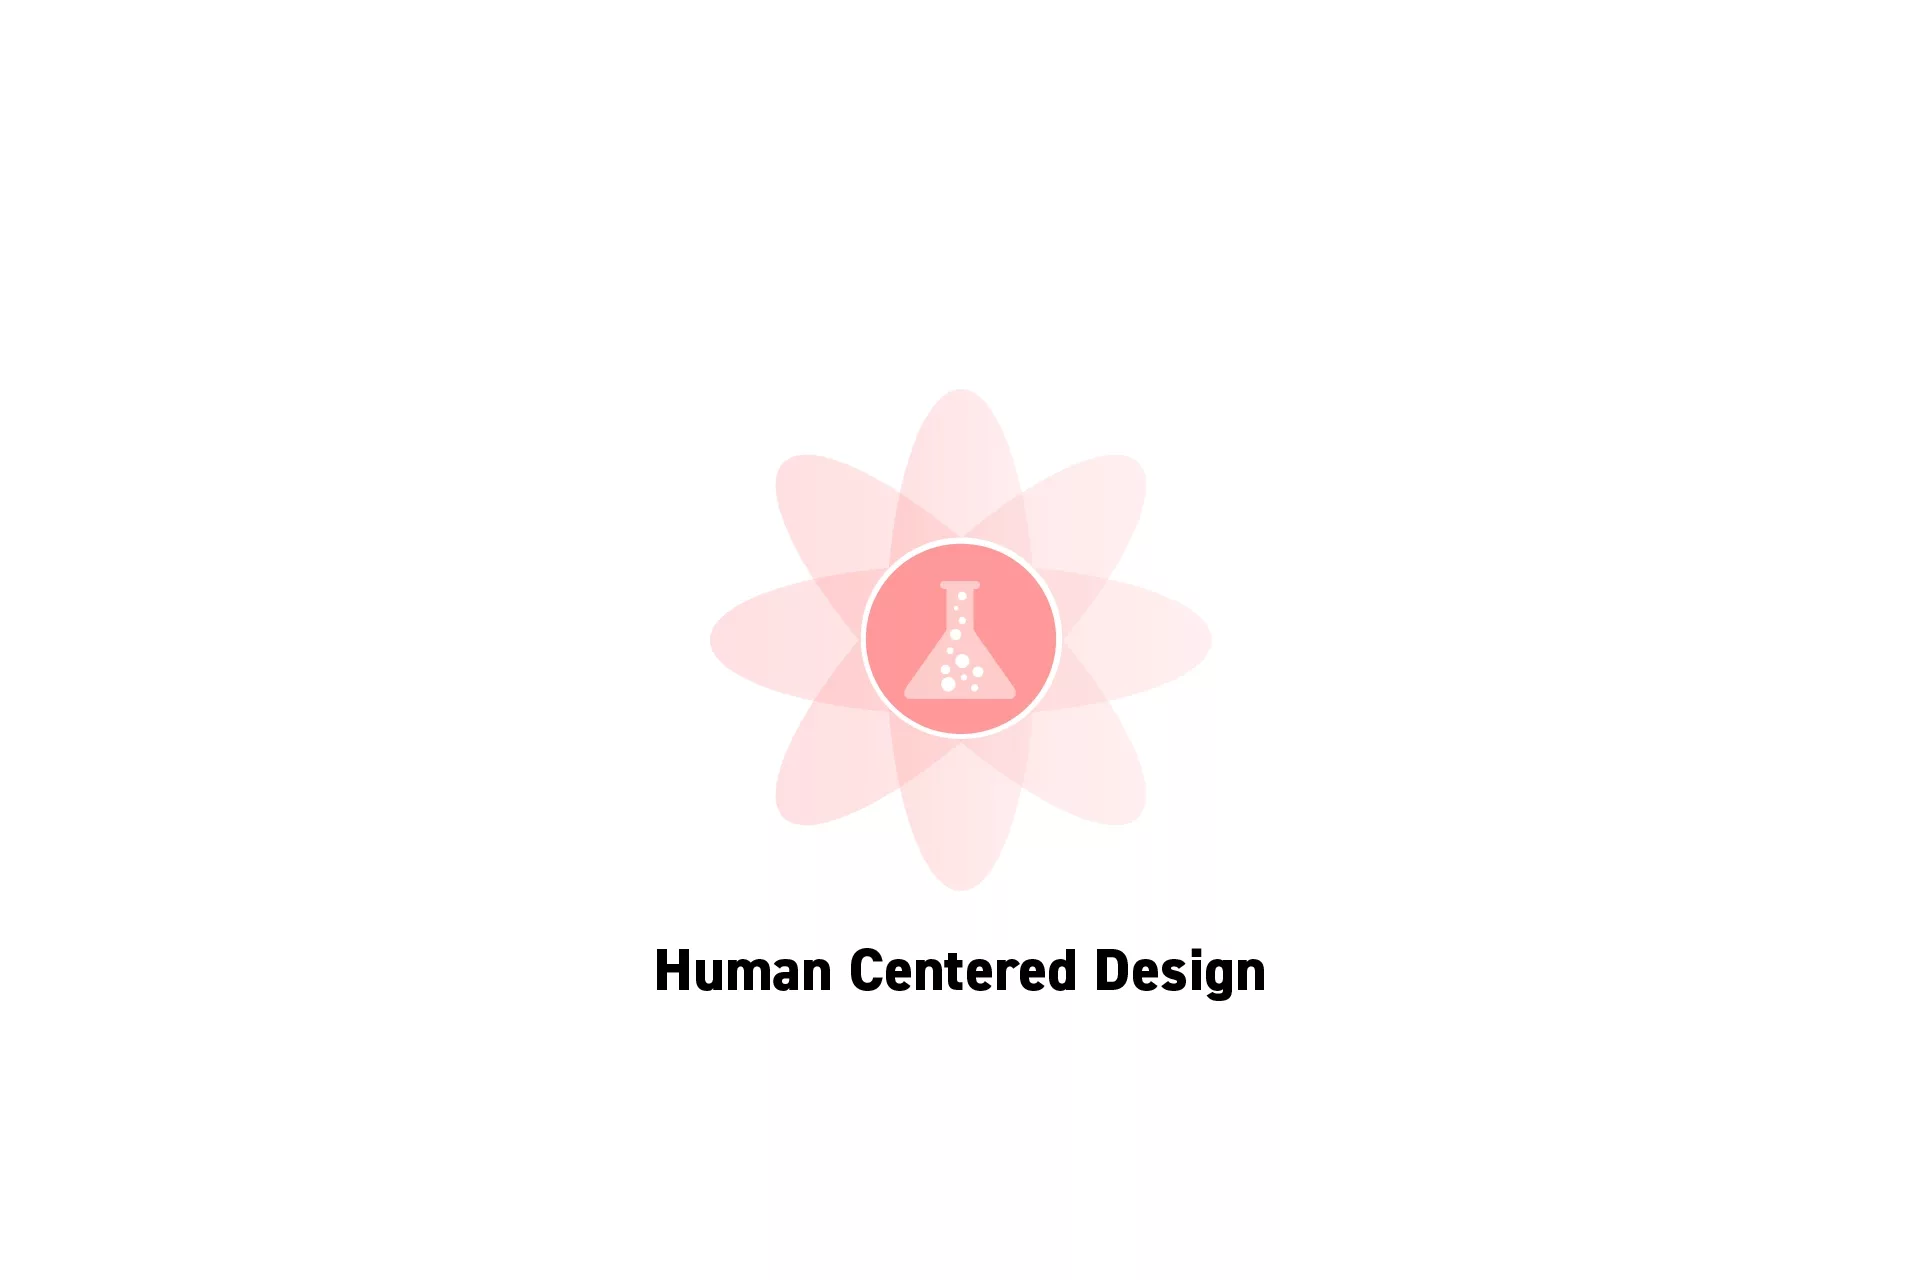 A flower that represents Strategy with the text “Human Centered Design” beneath it.